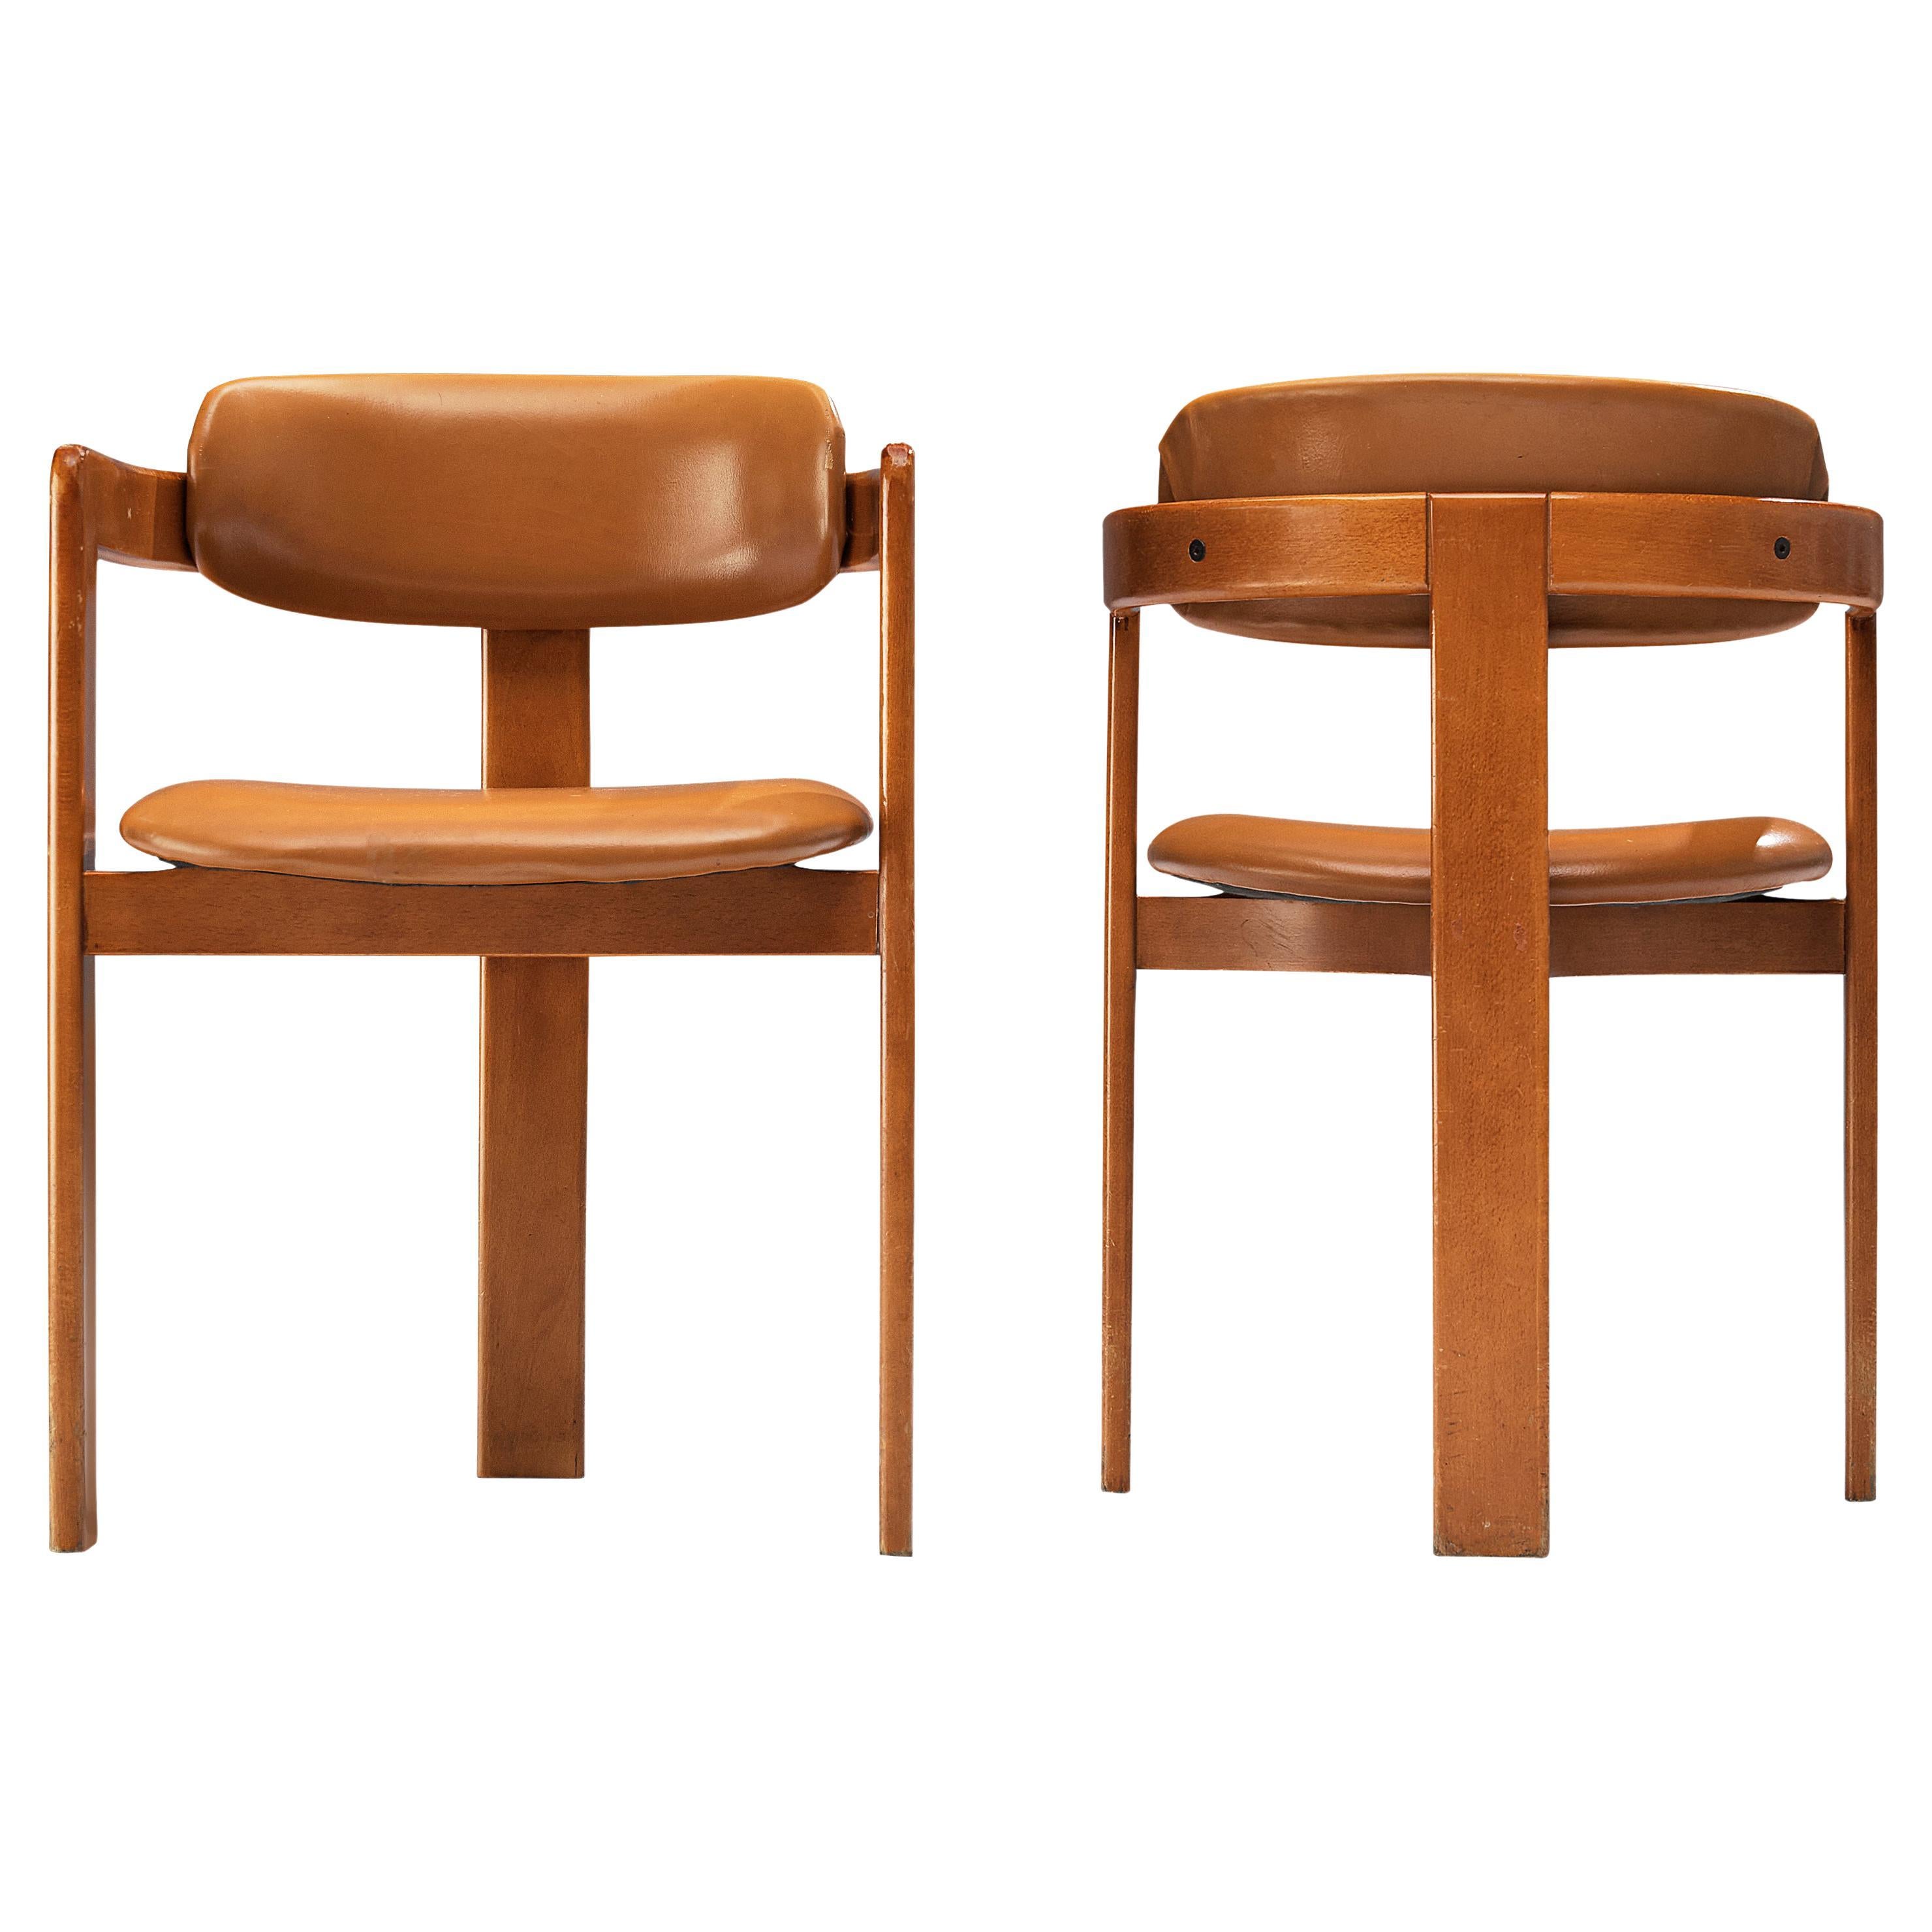 Pair of Italian Armchairs with Architectural Bentwood Frames